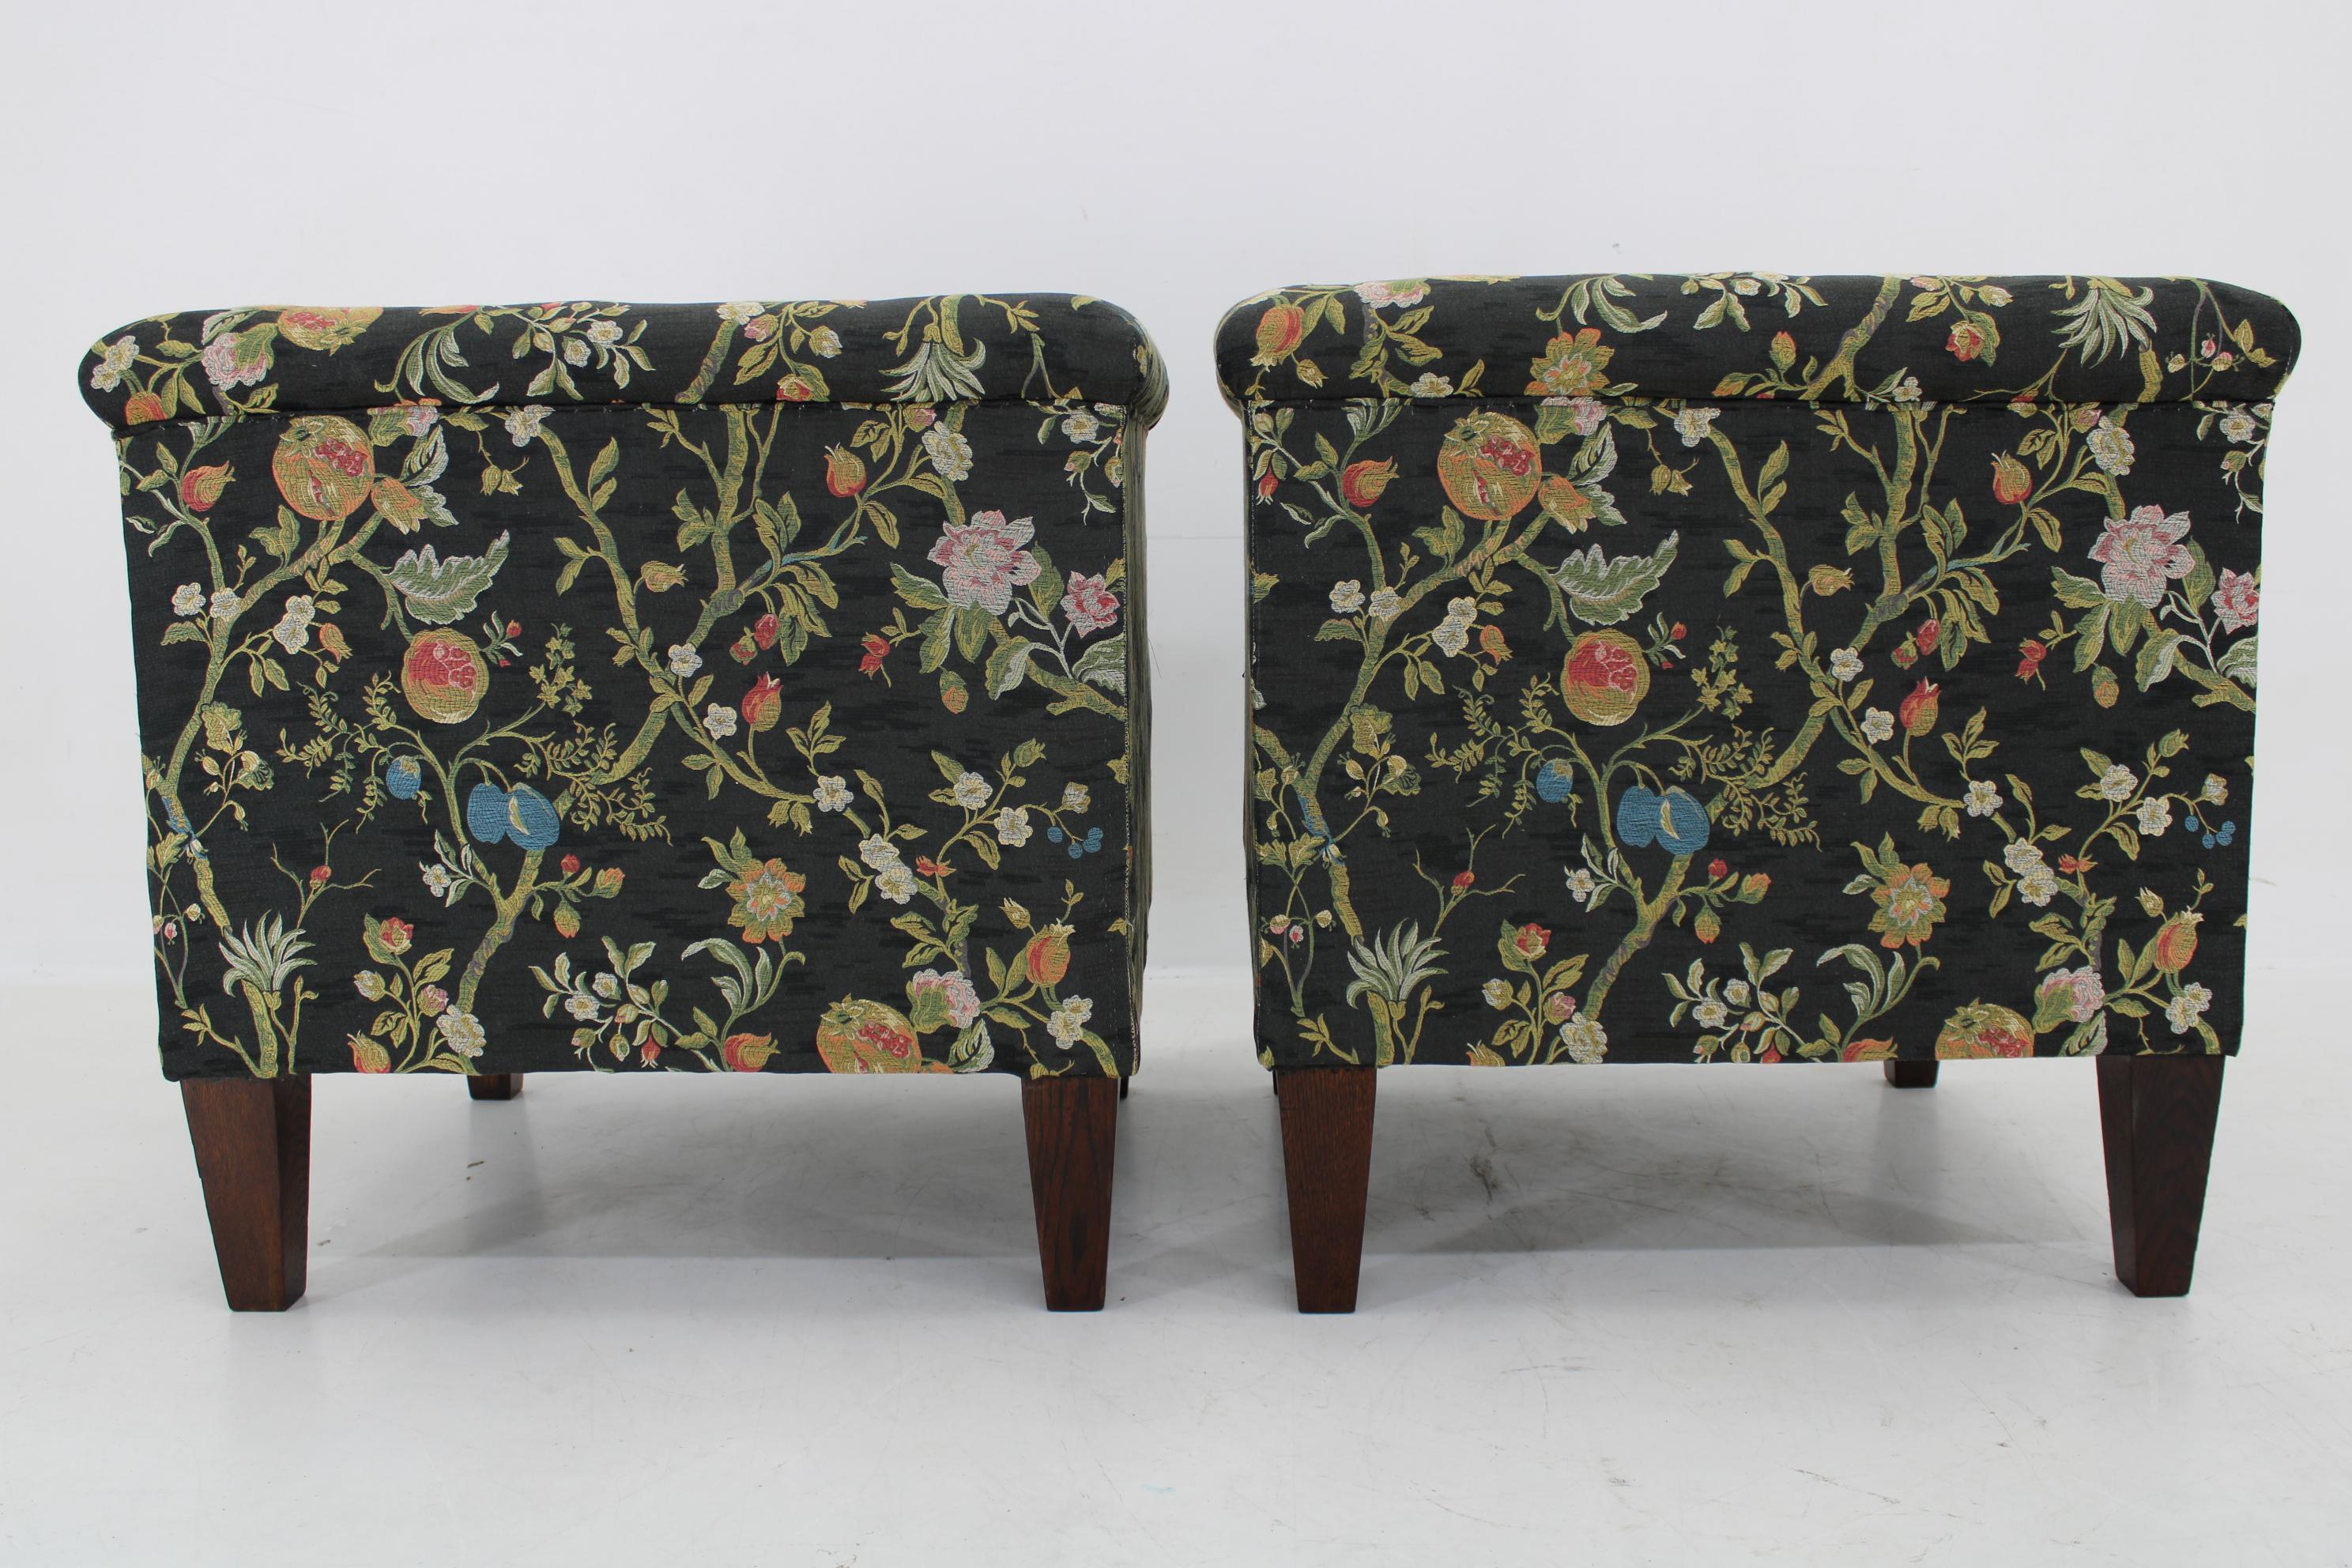 1930s Restored Pair of Art Deco Armchairs , Czechoslovakia For Sale 3